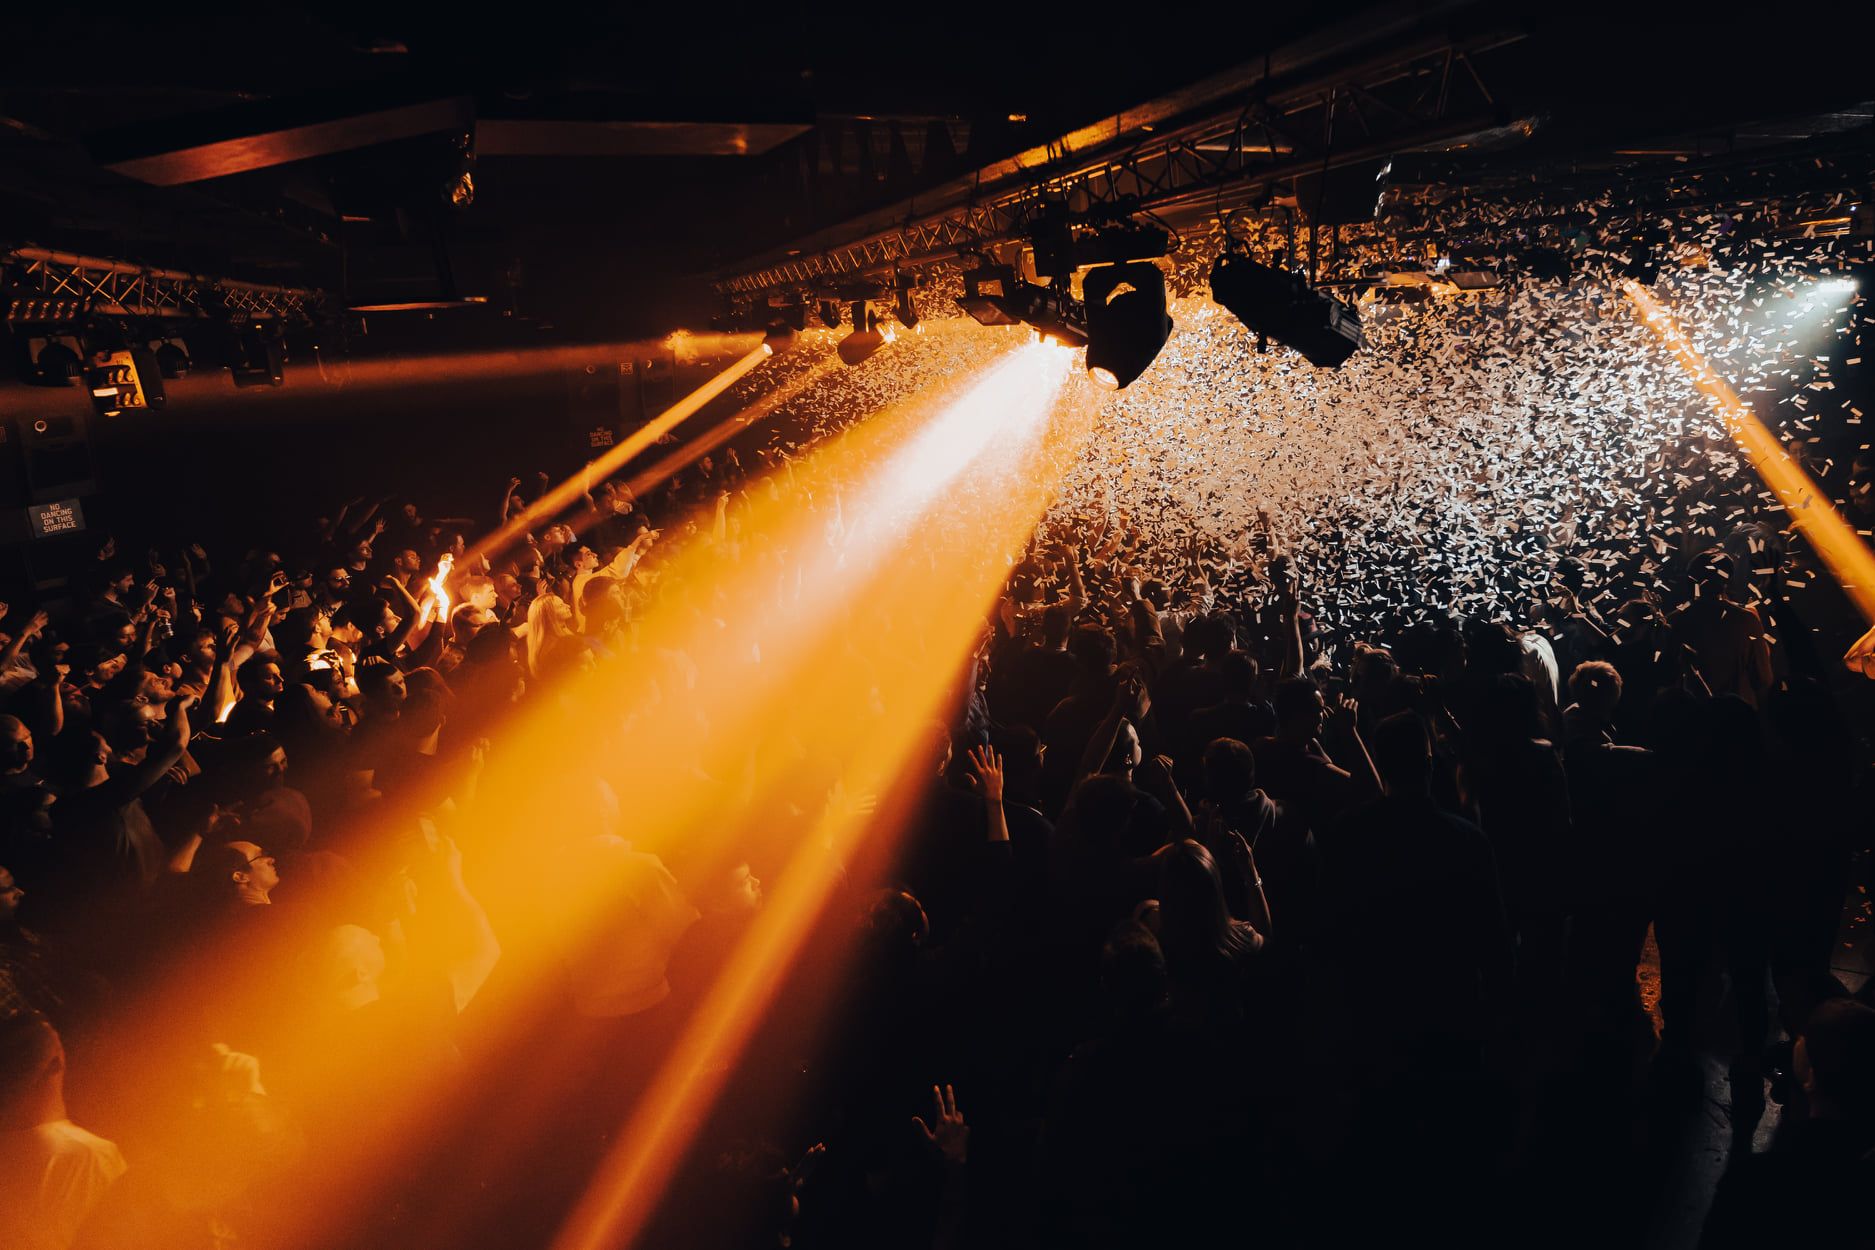 Ministry of Sound – A day in London